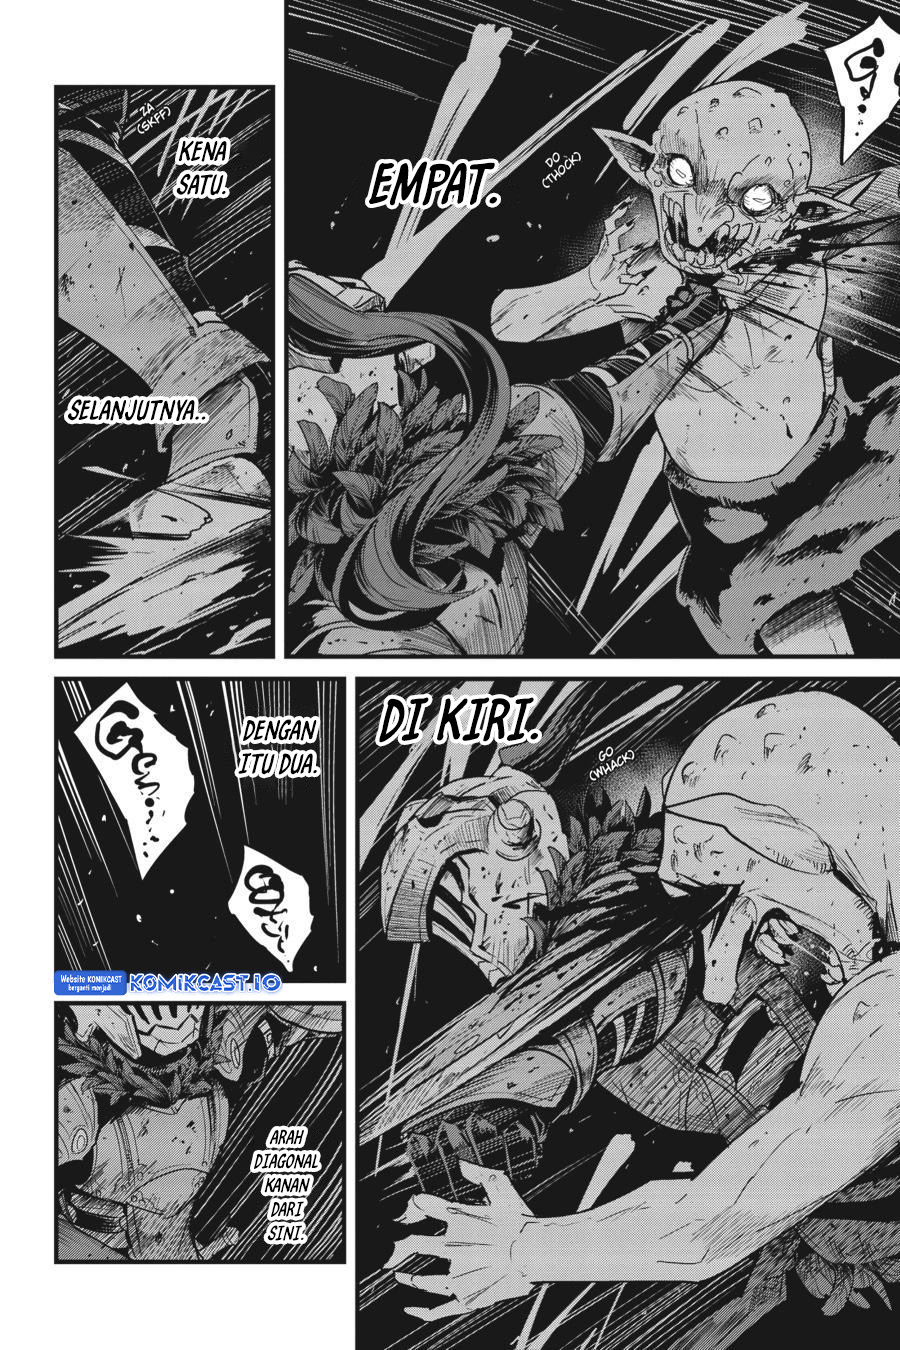 Goblin Slayer Side Story Year One Chapter 63